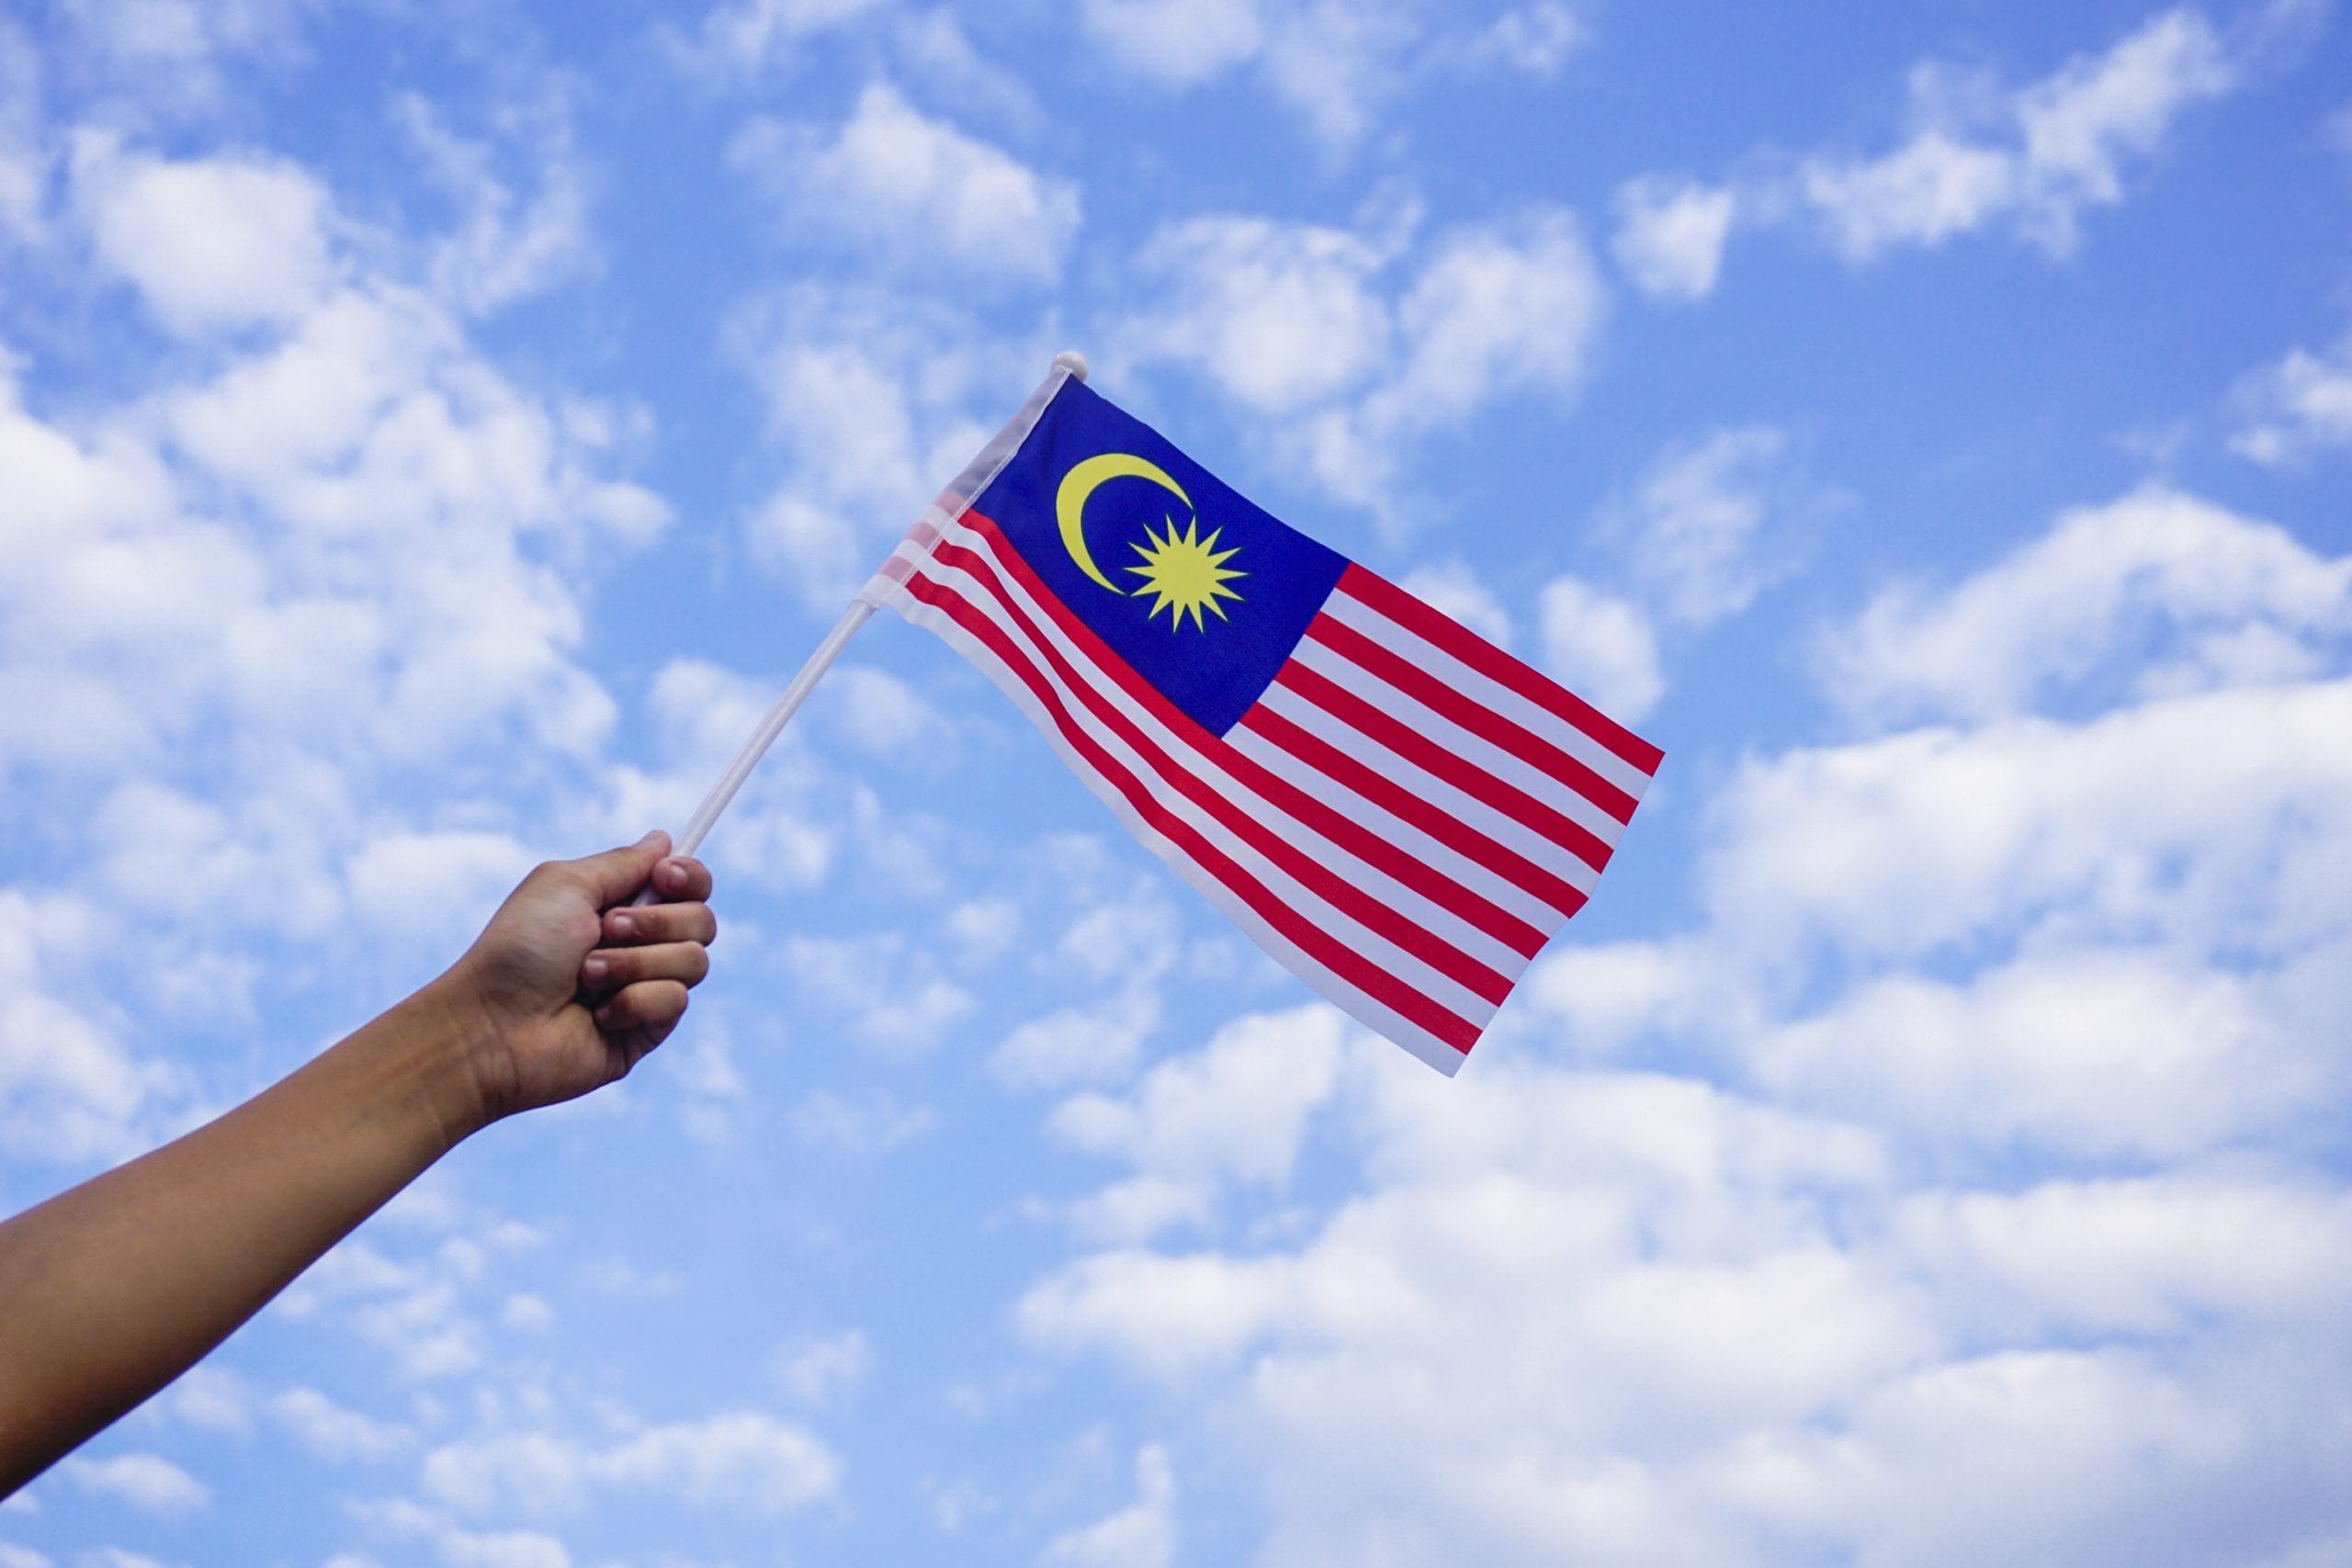 Malaysia: A malaysian flag being held up against a blue sky